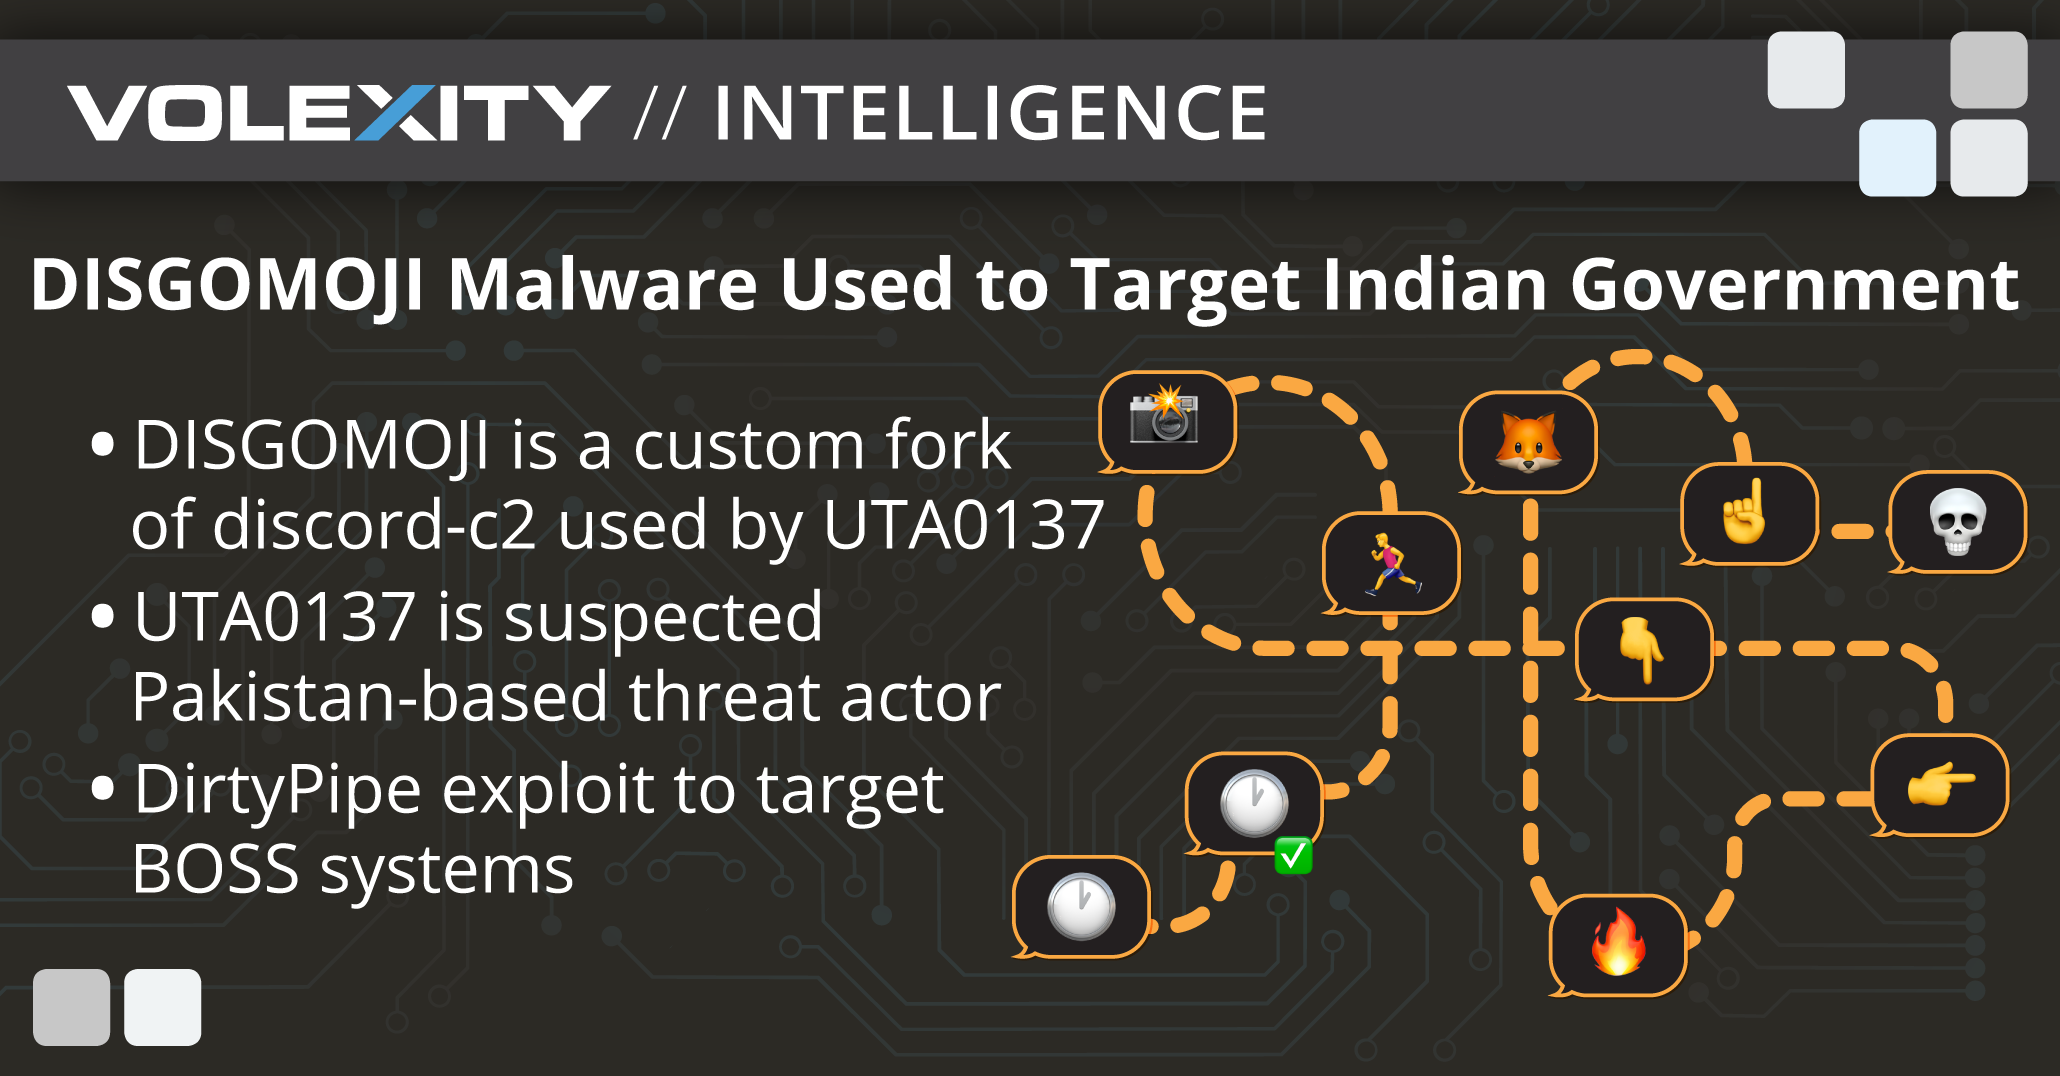 Volexity-Blog-DISGOMOJI-Malware-Used-to-Target-Indian-Government.png